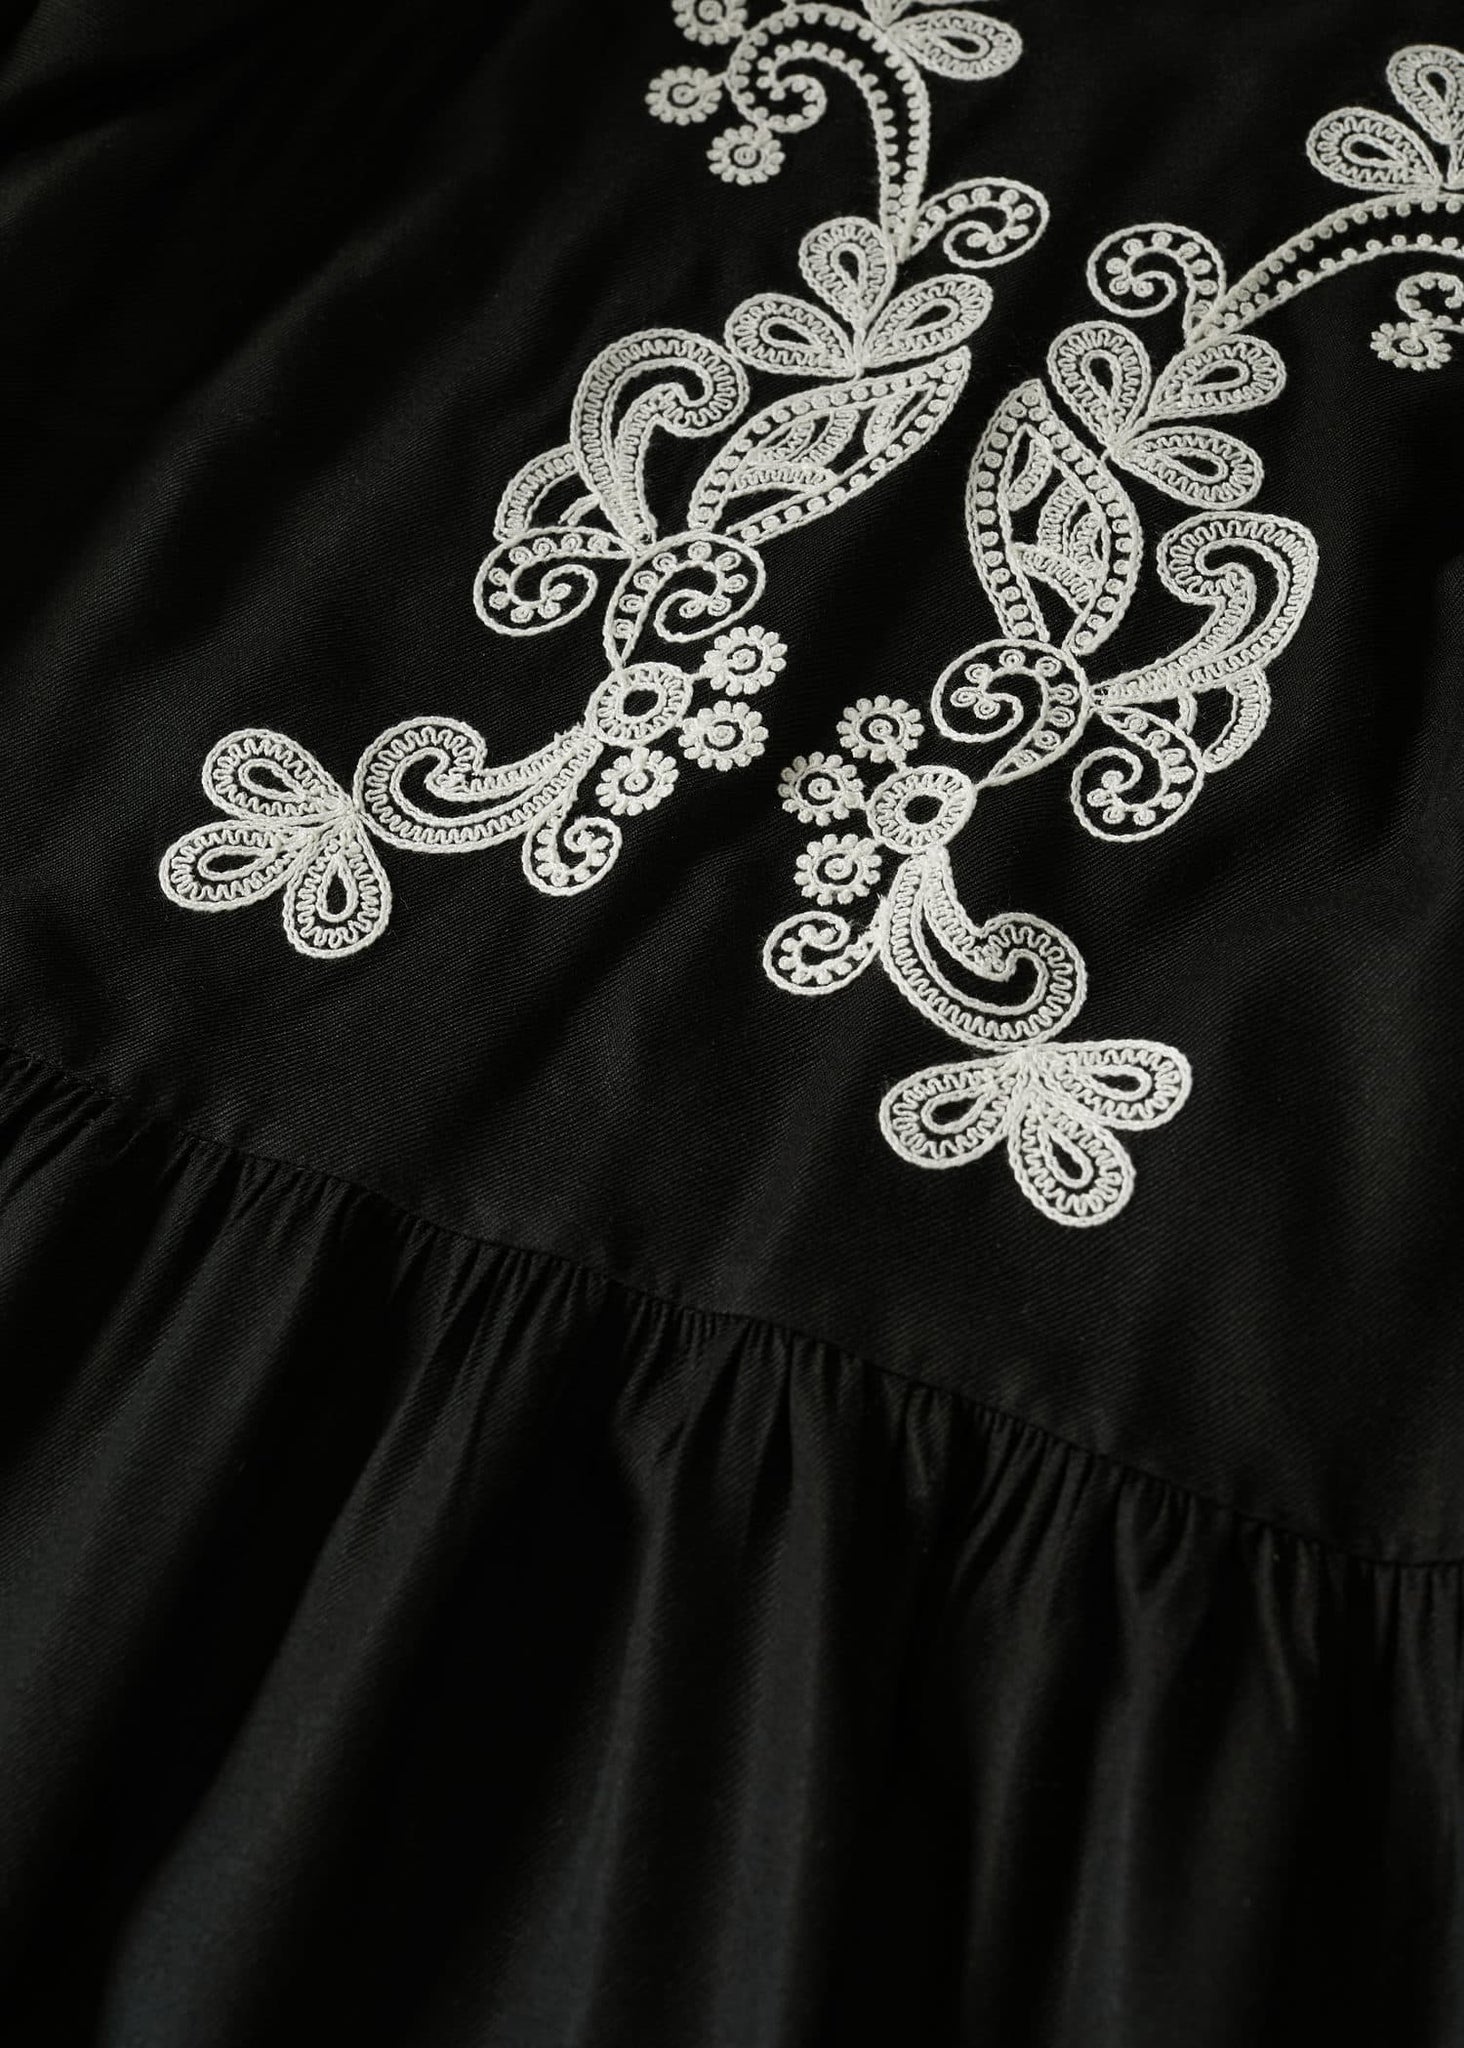 Ethnic embroidery dress - Details of the article 8